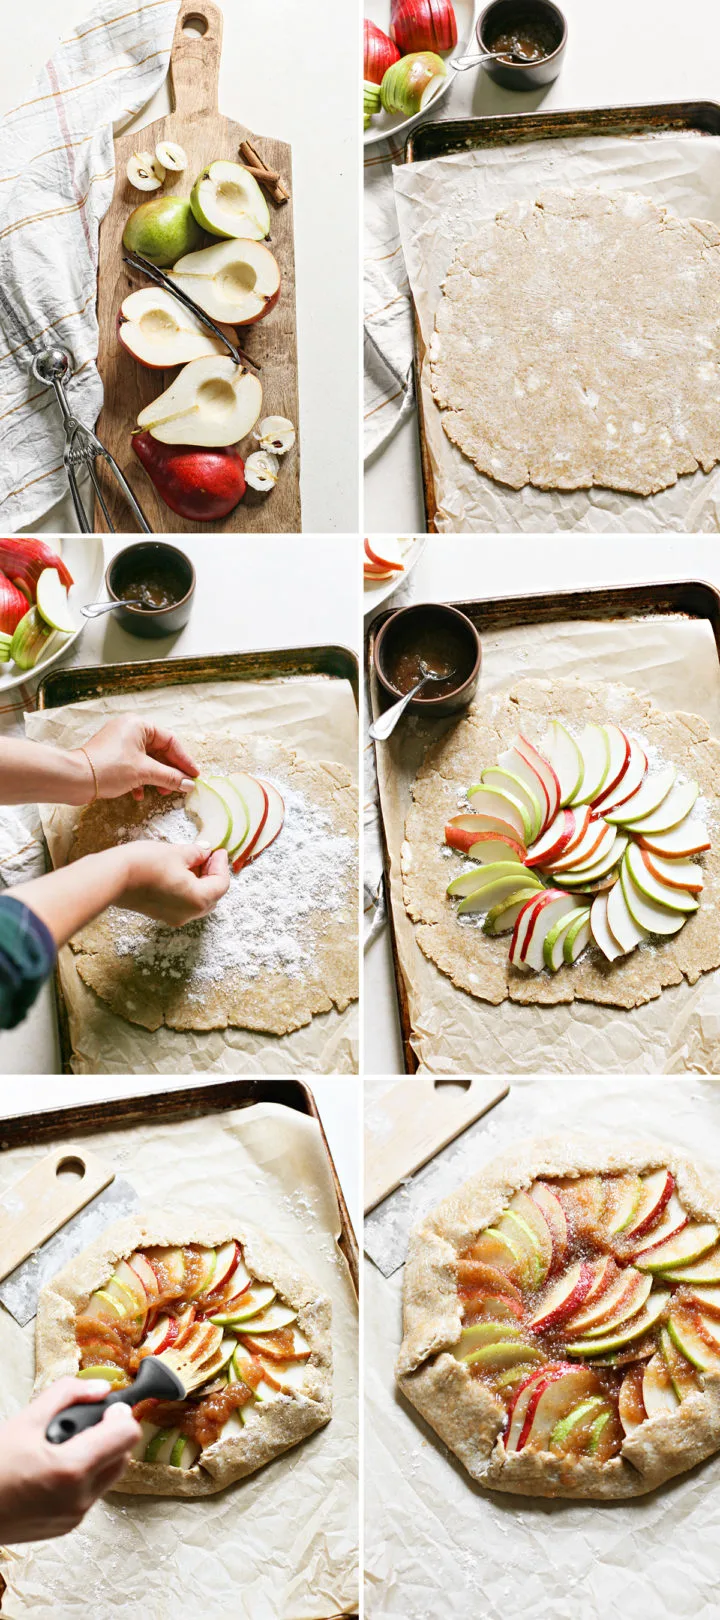 step by step photos showing how to make a pear galette